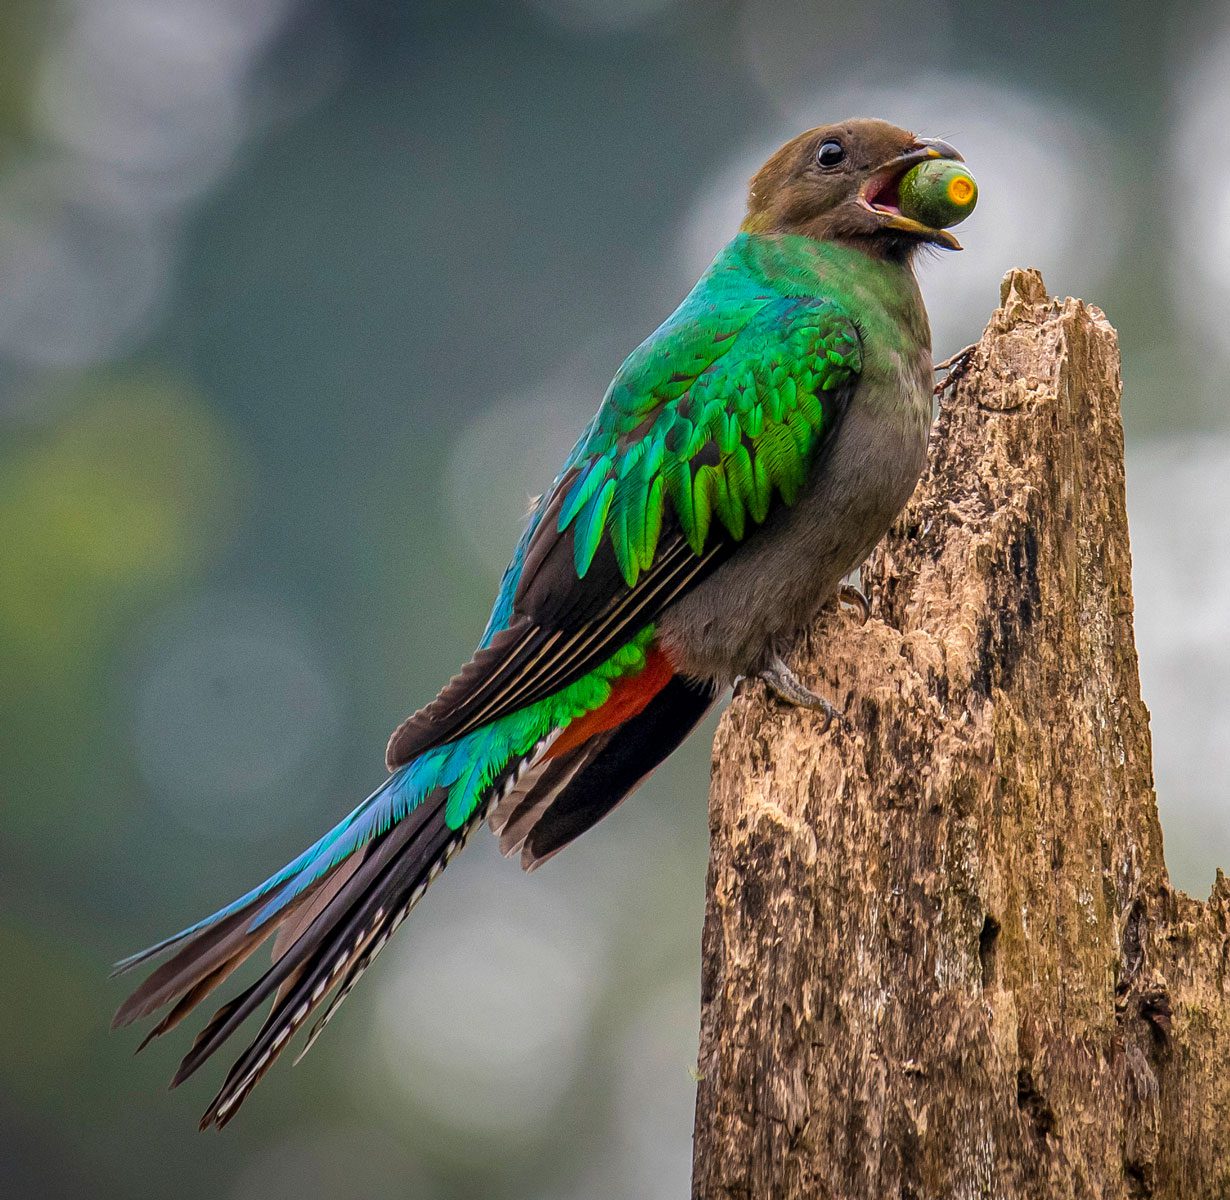 Iridescent green bird with a brown head holds a nut while perched on a tree stump.